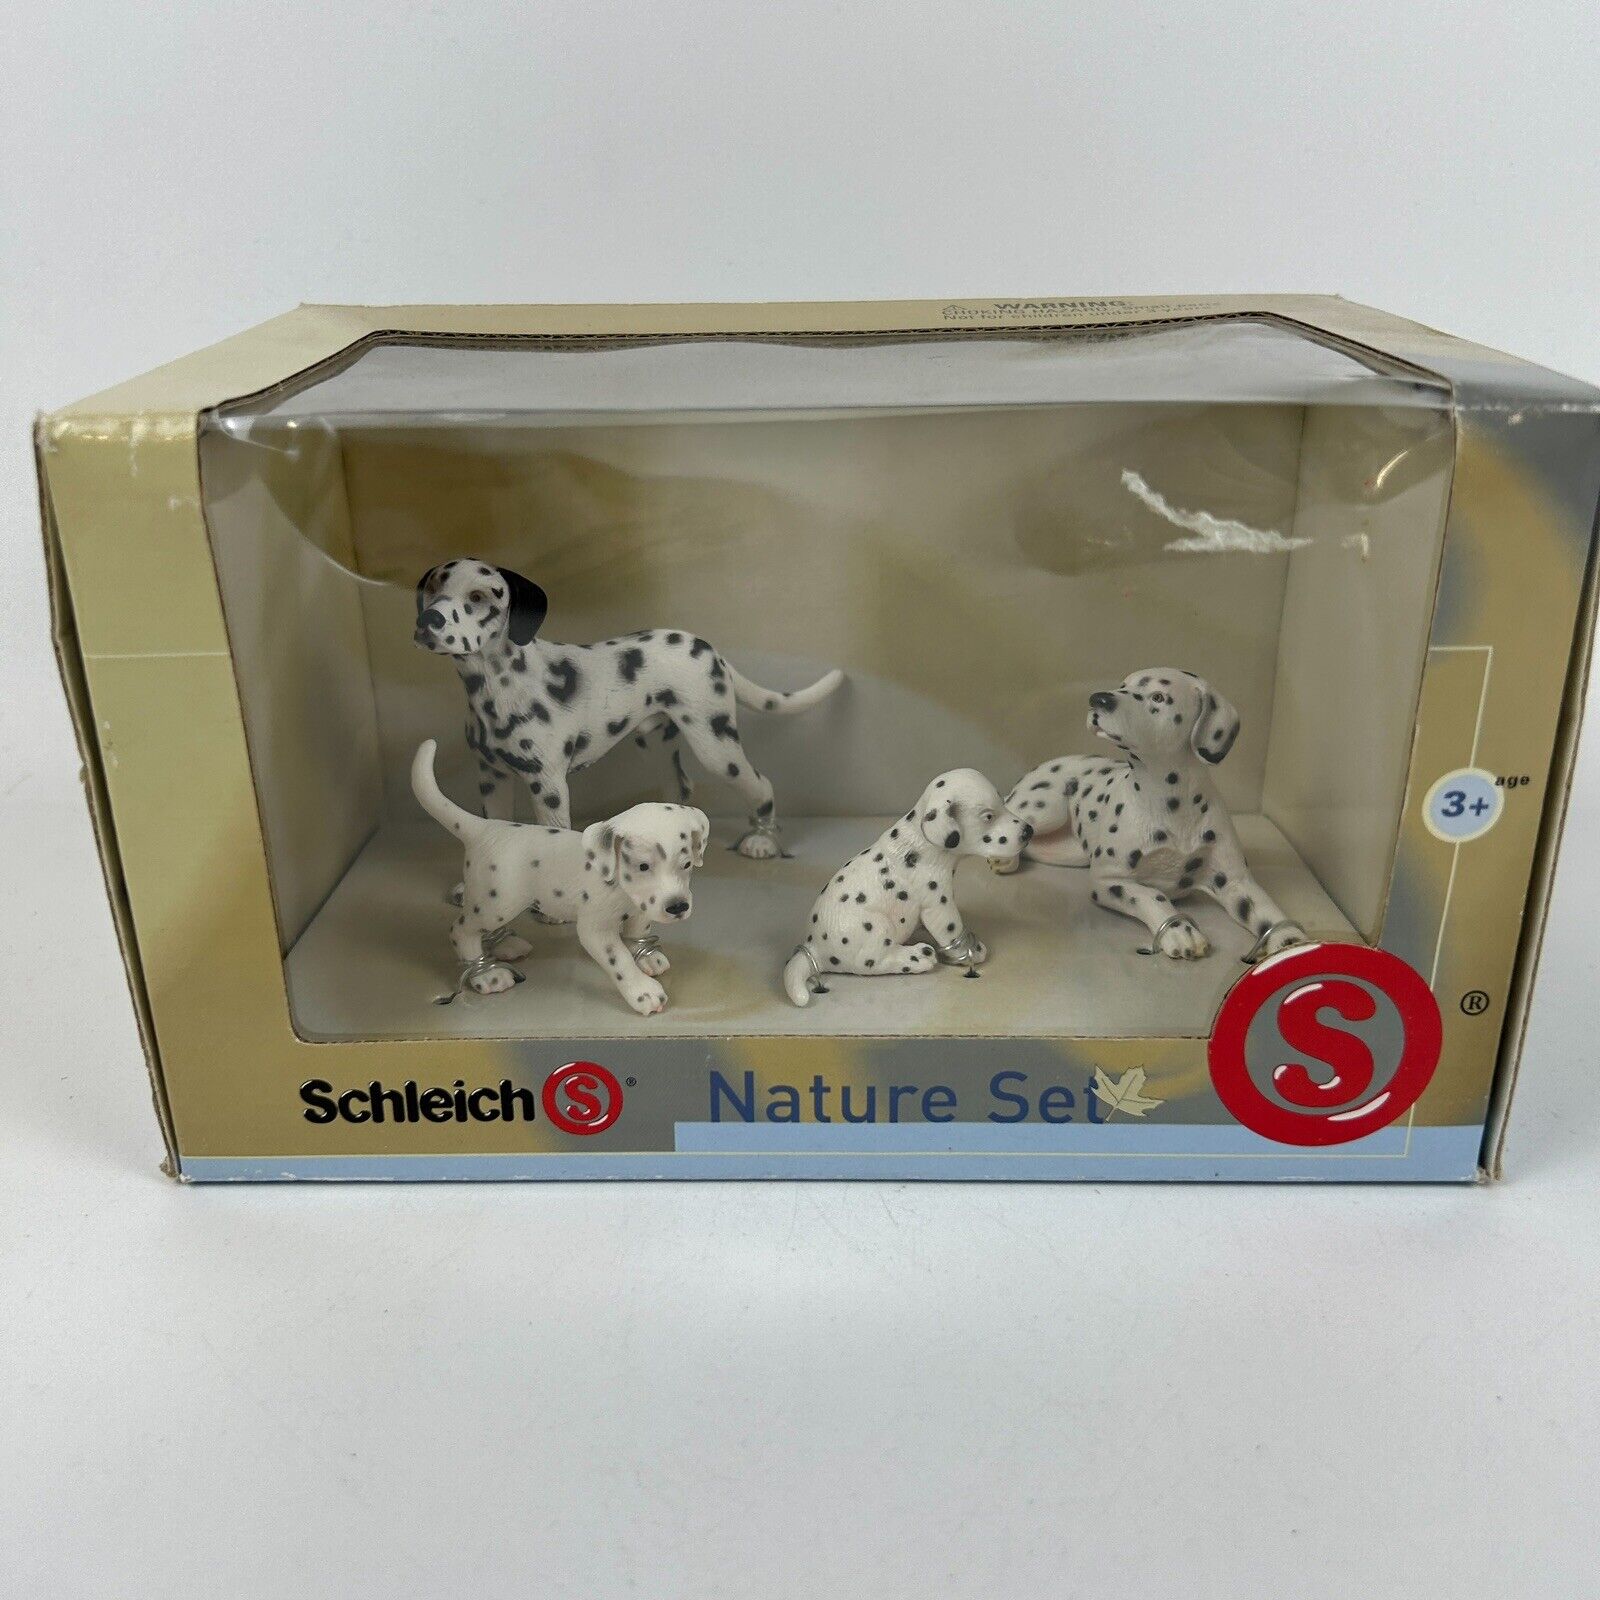 Schleich Nature Set Dalmatian Dog Family Figures New In The Box